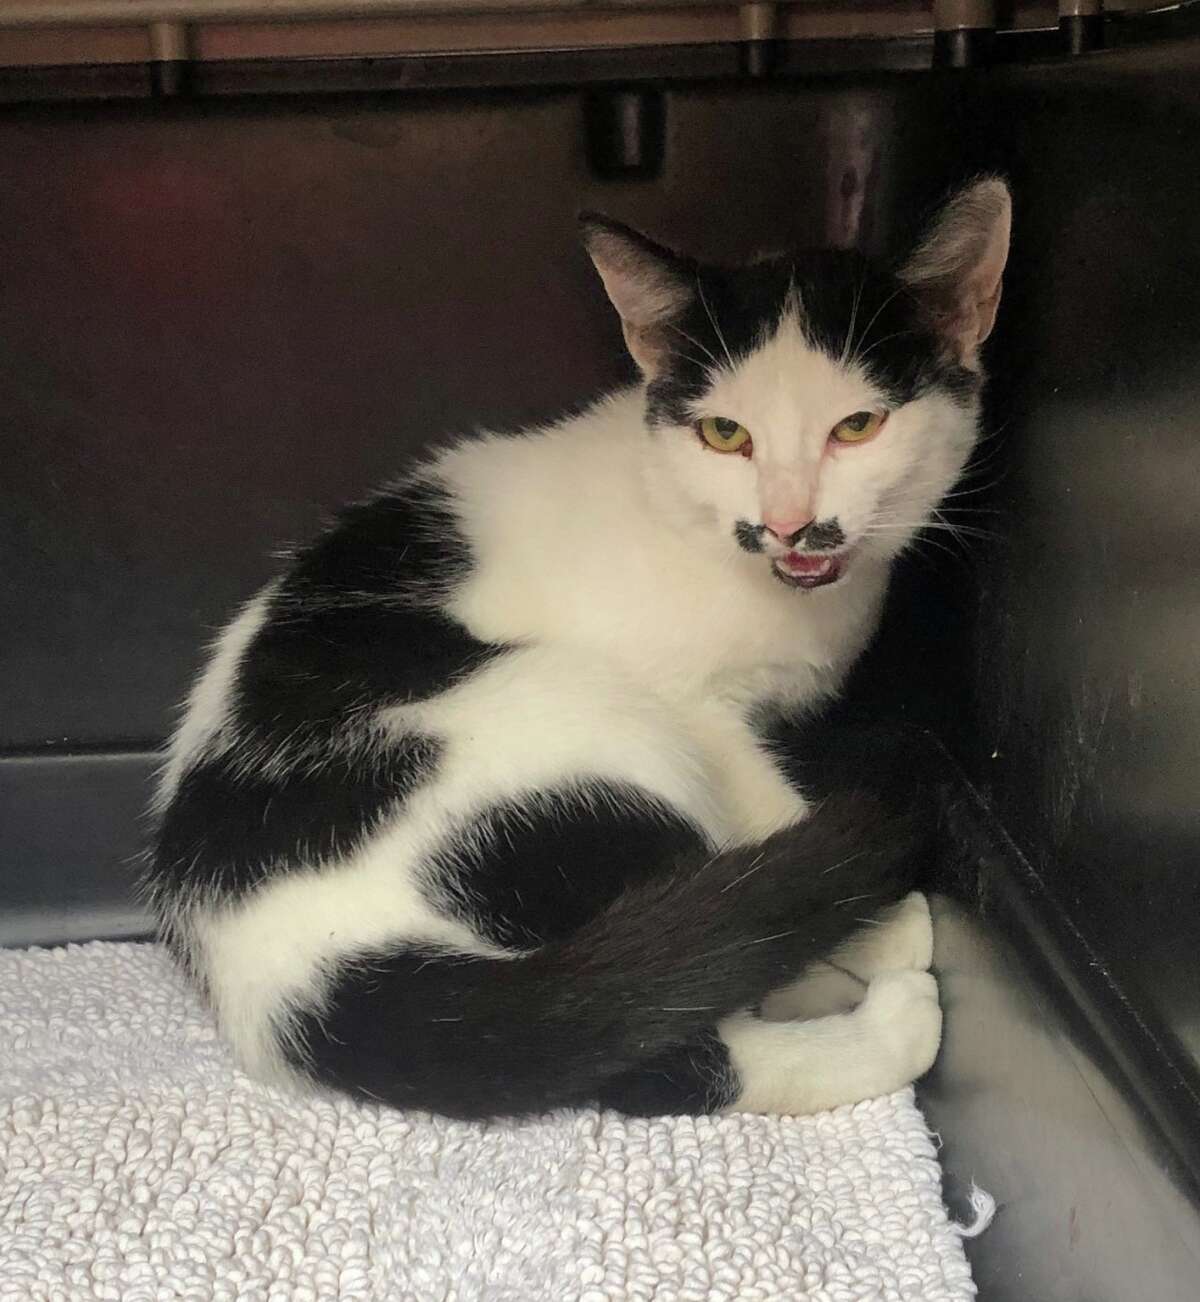 Houston SPCA rescued a 6-month-old kitten who was trapped between six lanes of fast-moving traffic near 610 and 59 on Sunday. >>>PHOTOS: Why Houston is one of the least pet-friendly cities...